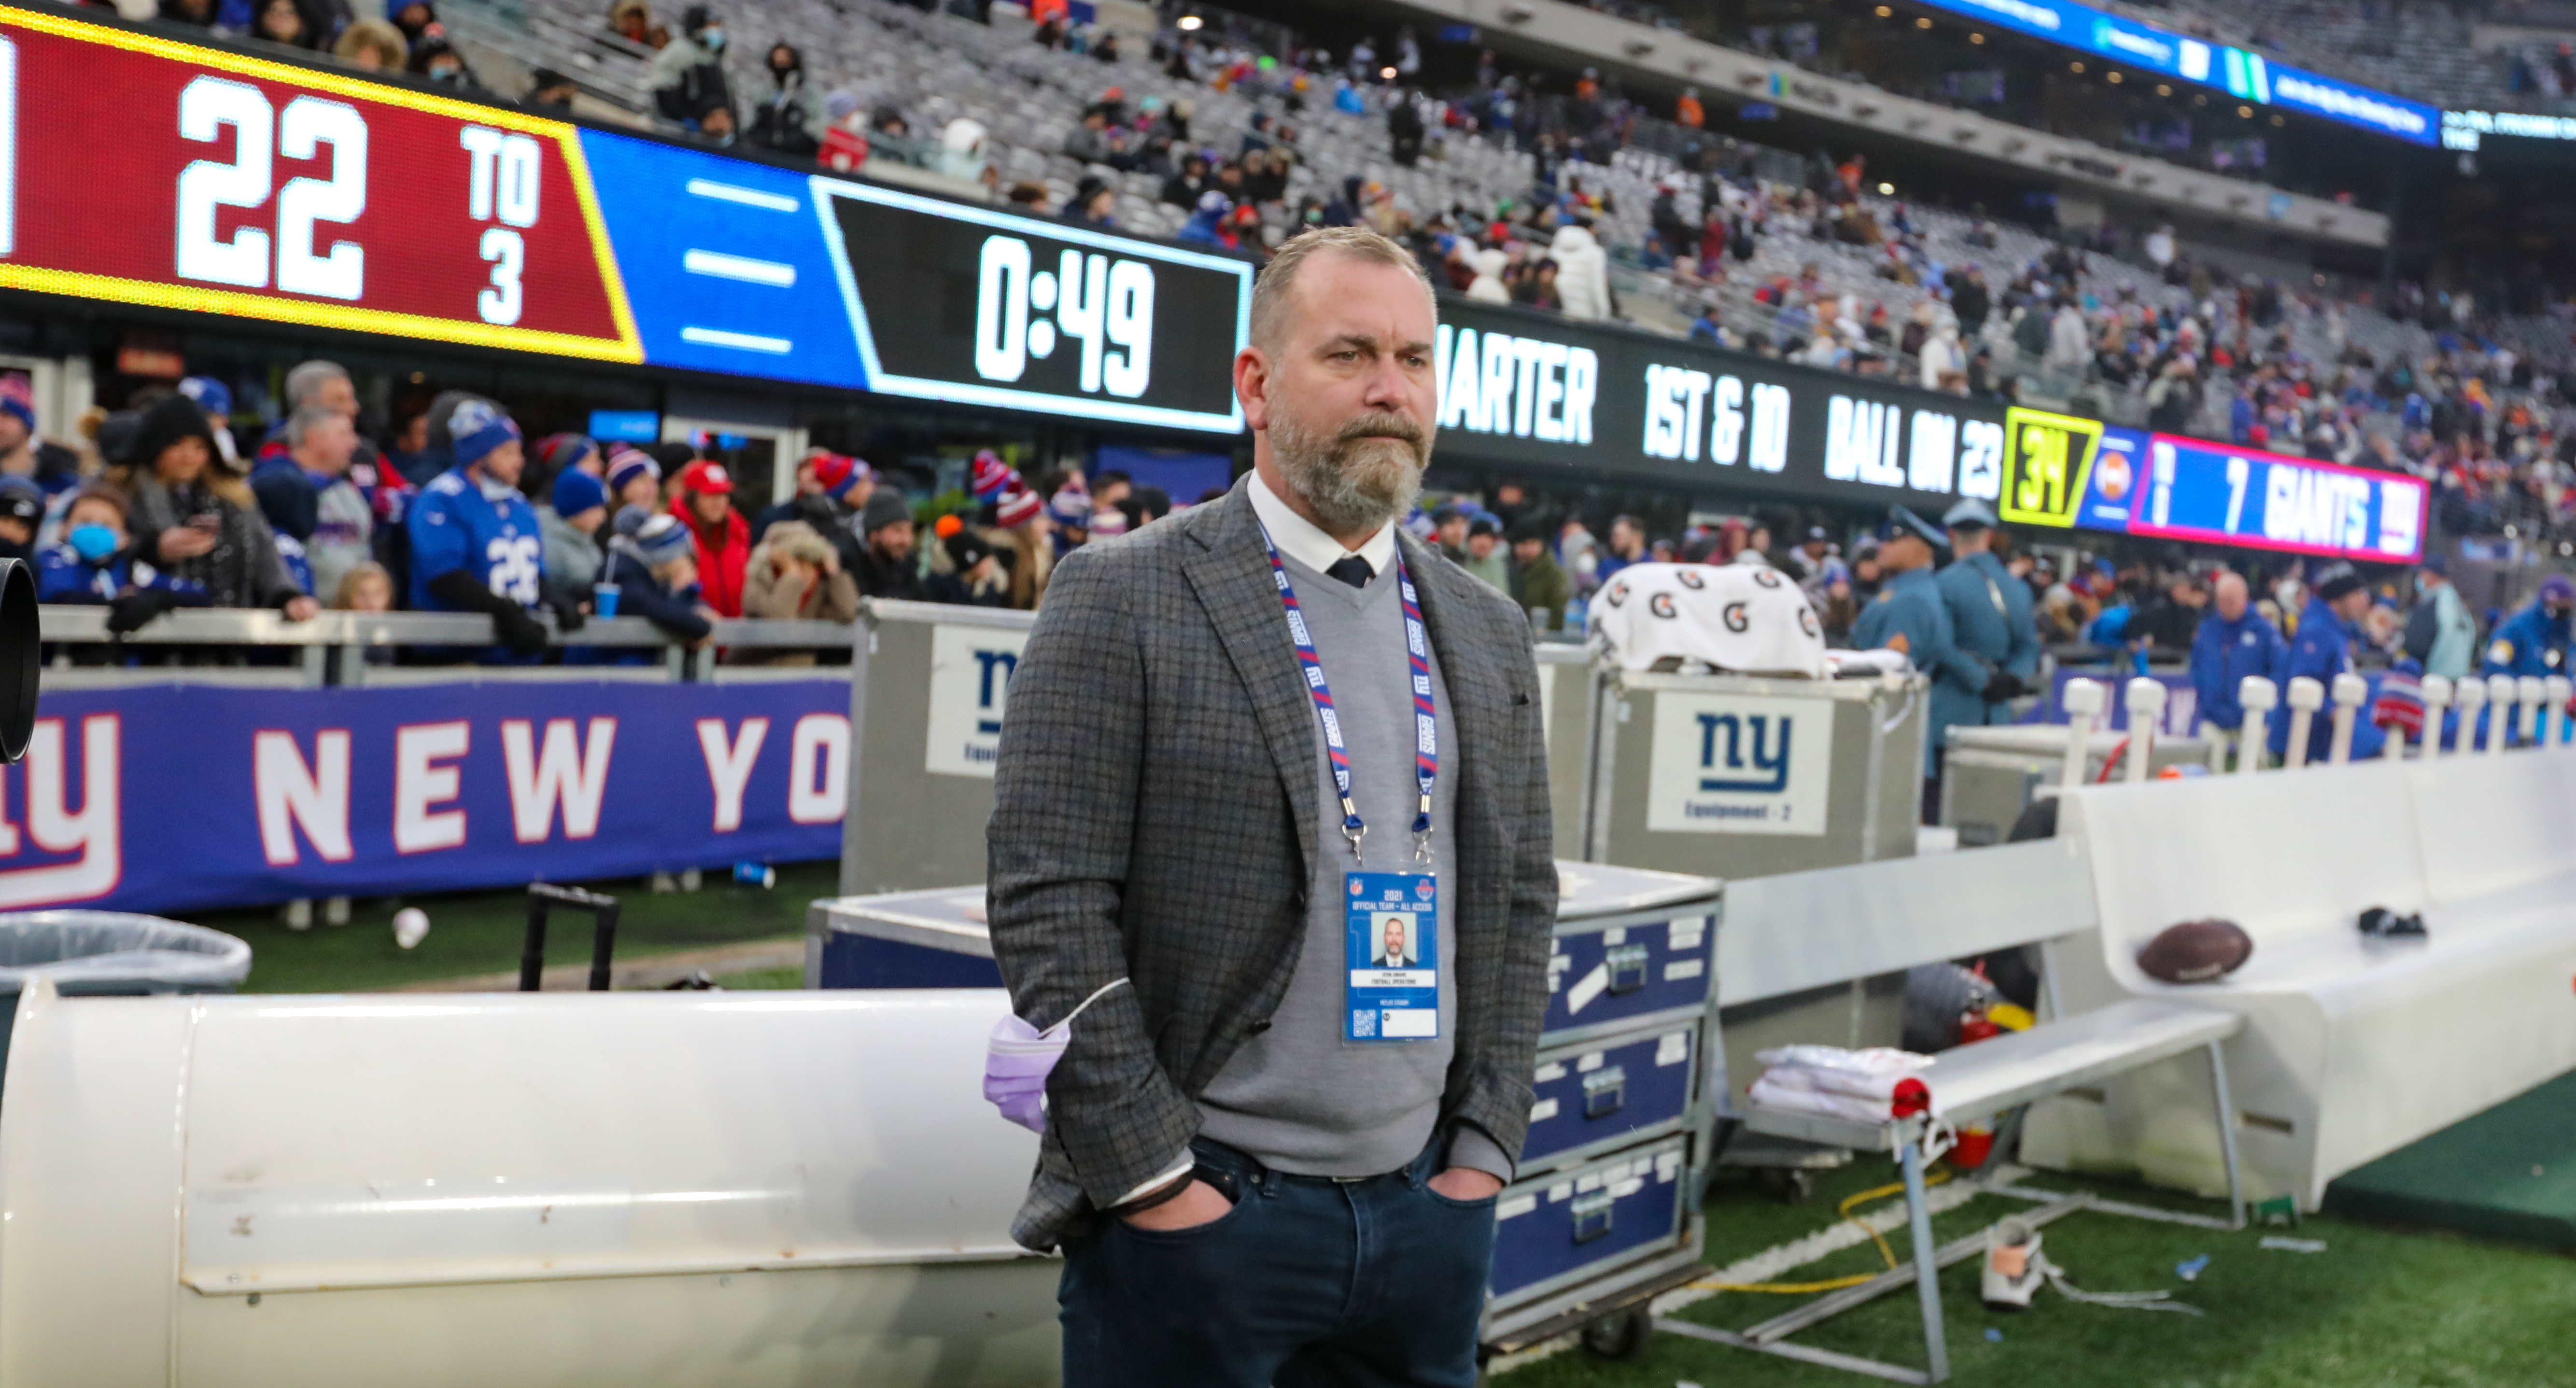 New York Giants assistant general manager Kevin Abrams on the Giants bench late in the fourth quarter as they lose to Washington Football Team, 22-7, on Sunday, Jan. 9, 2022 in East Rutherford, N.J.